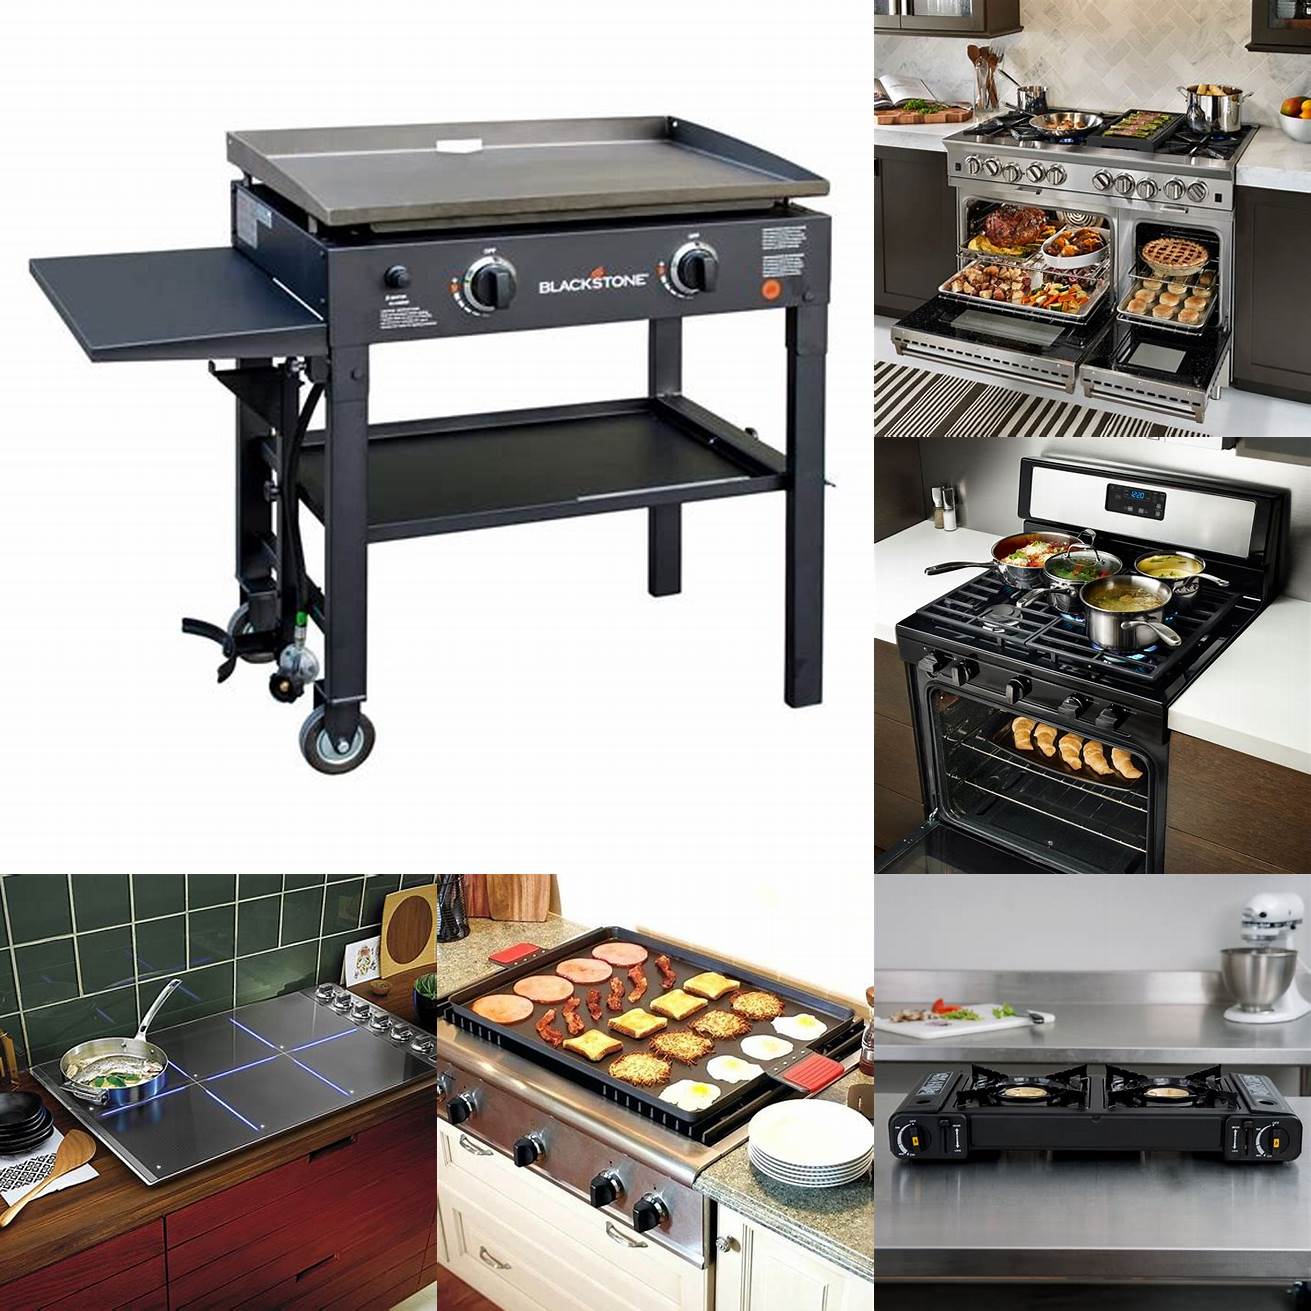 Large cooking surface with multiple burners